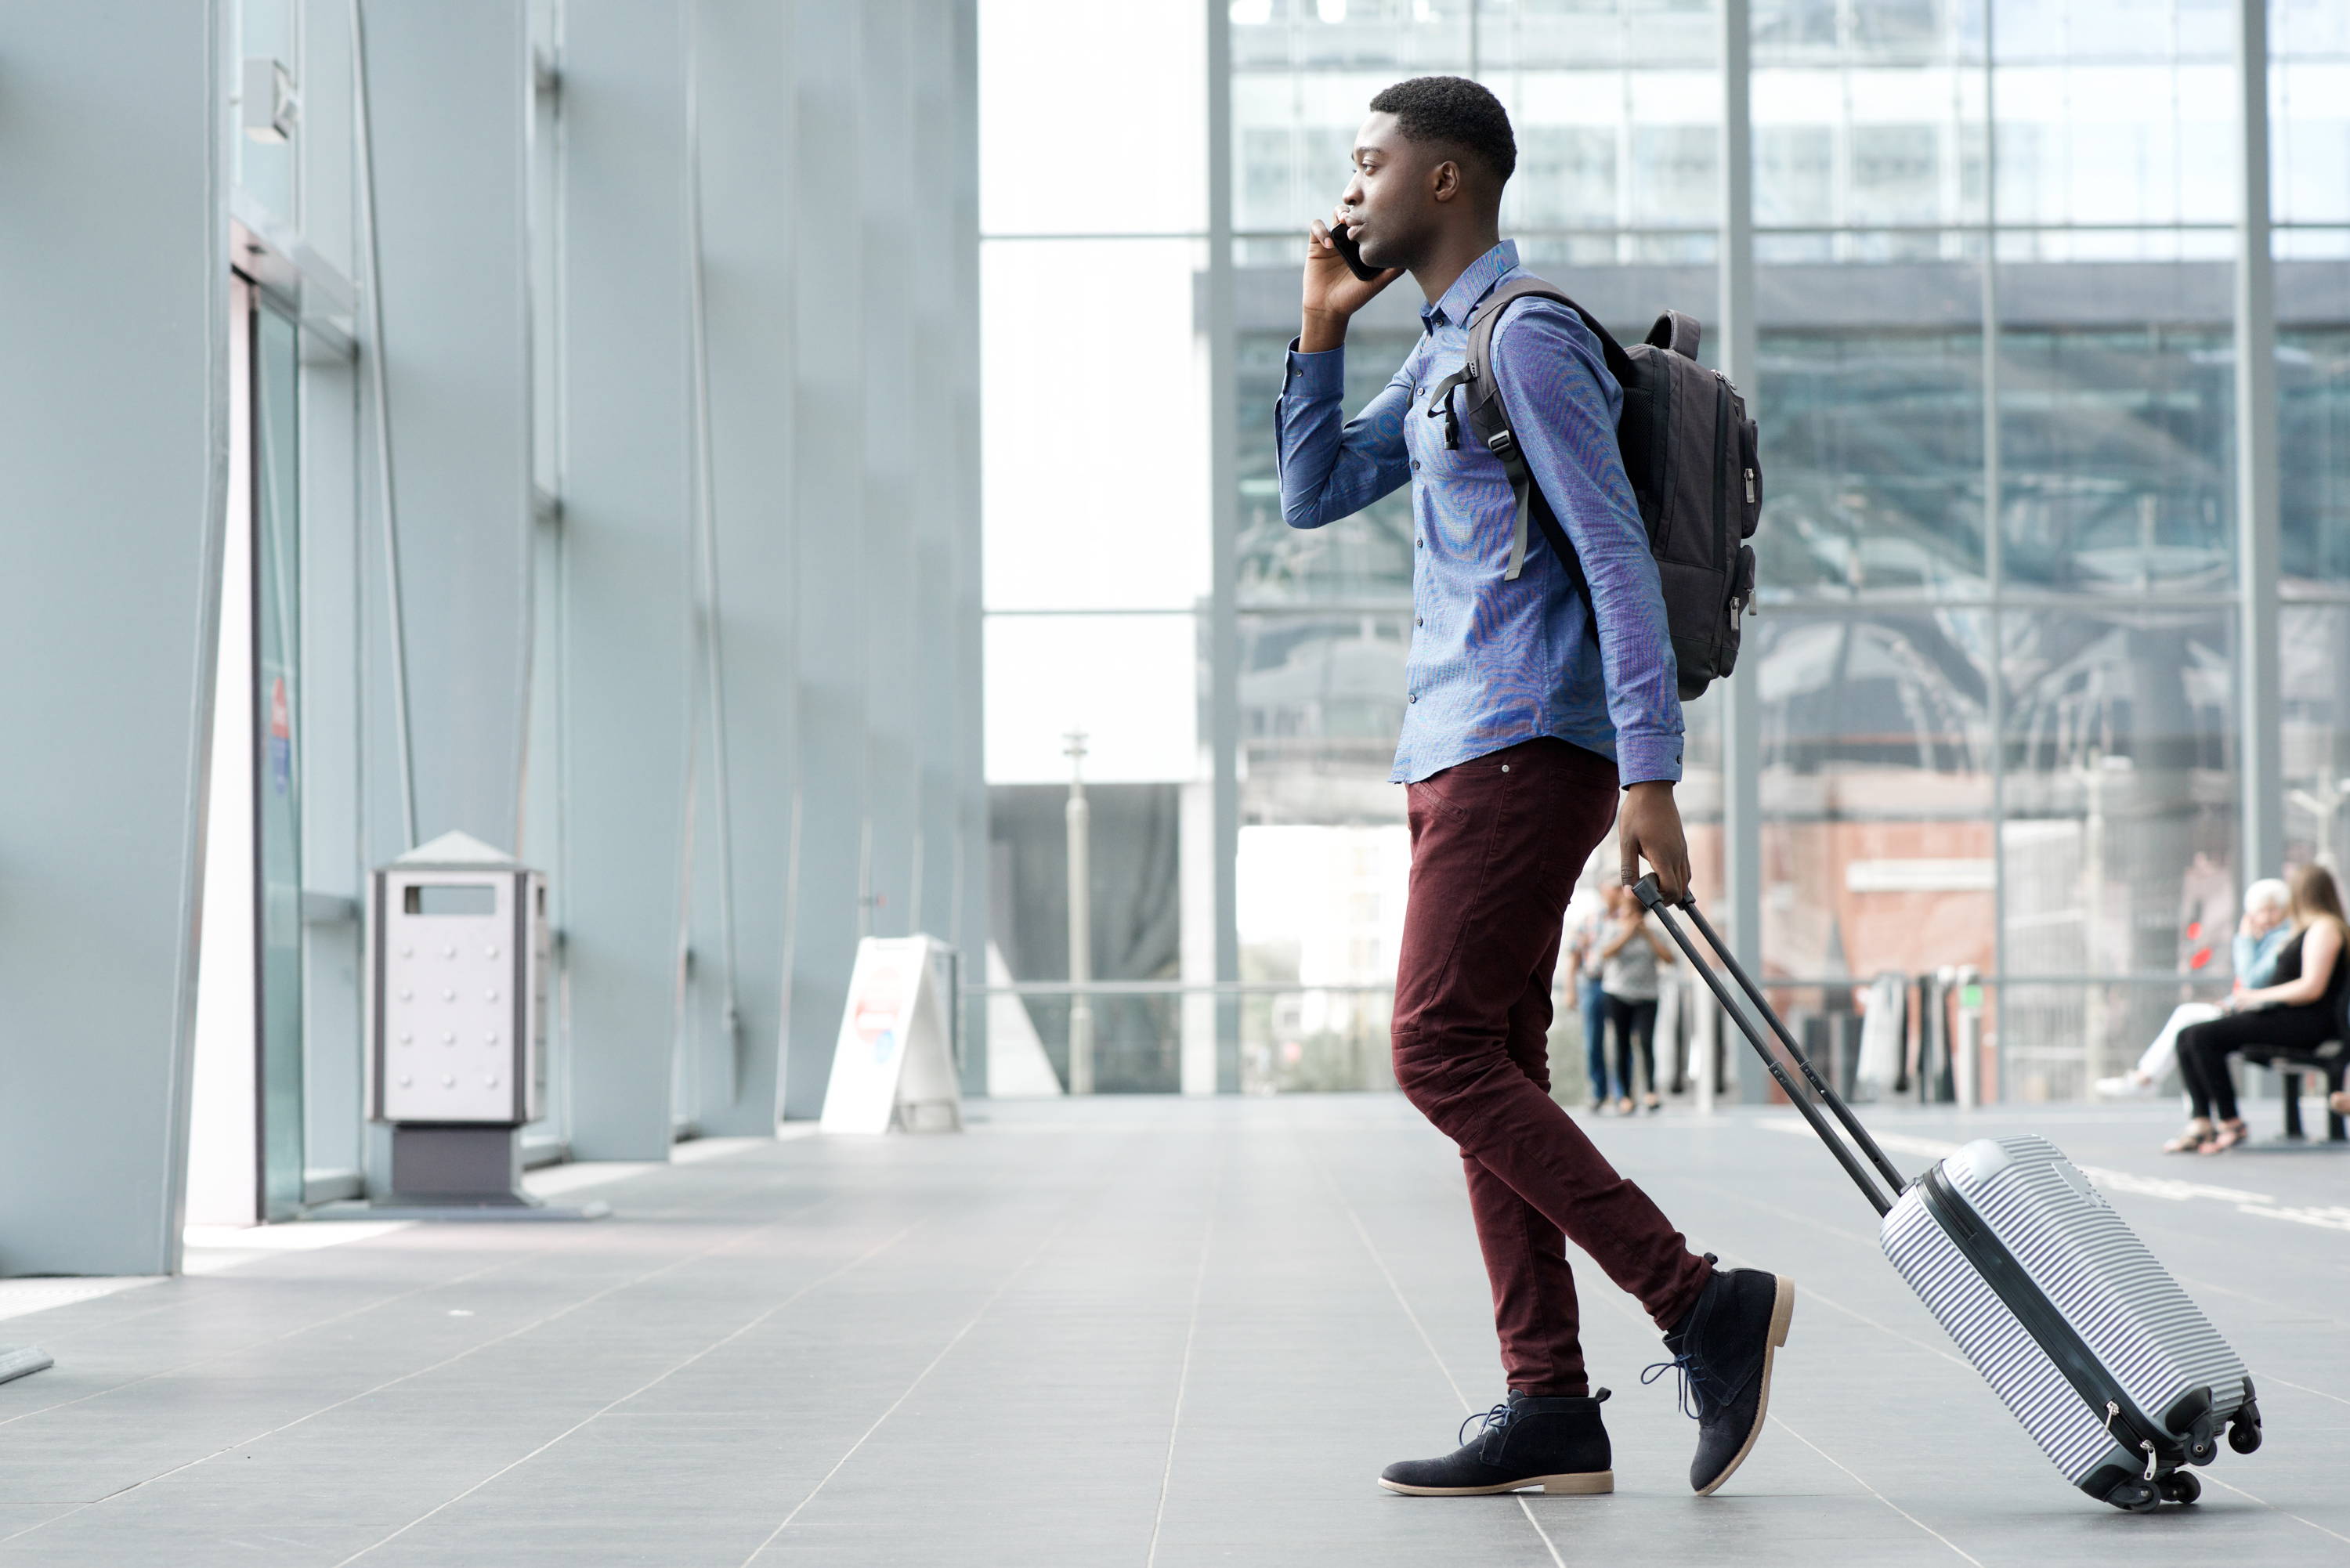 Man traveling with backpack and suitcase while on the phone